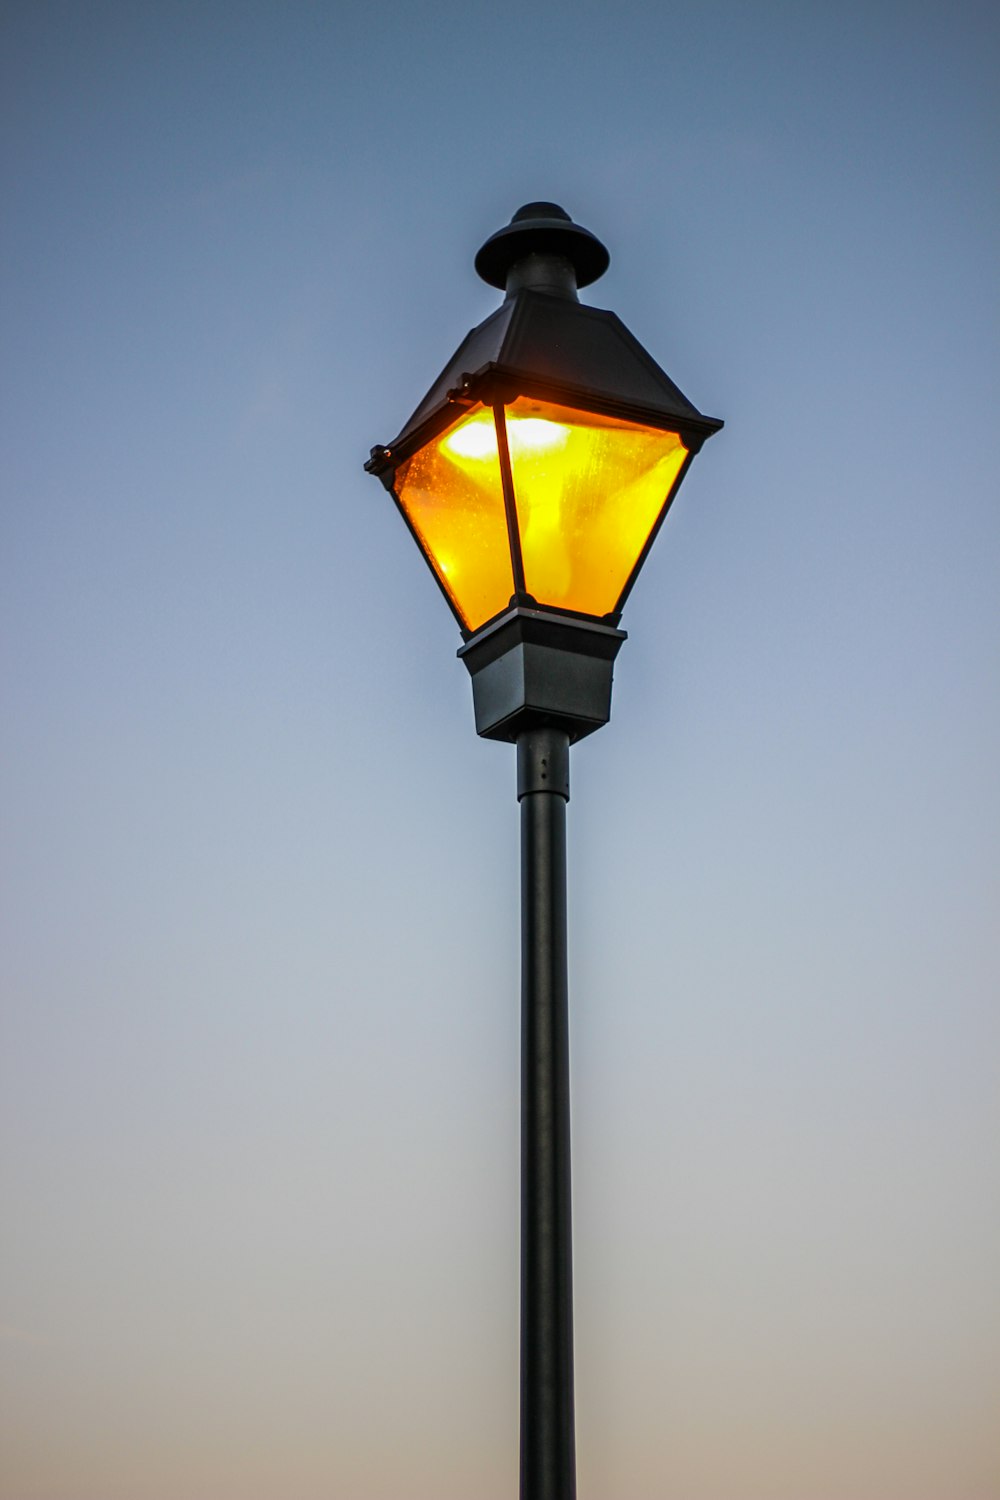 architectural photography of street lamp